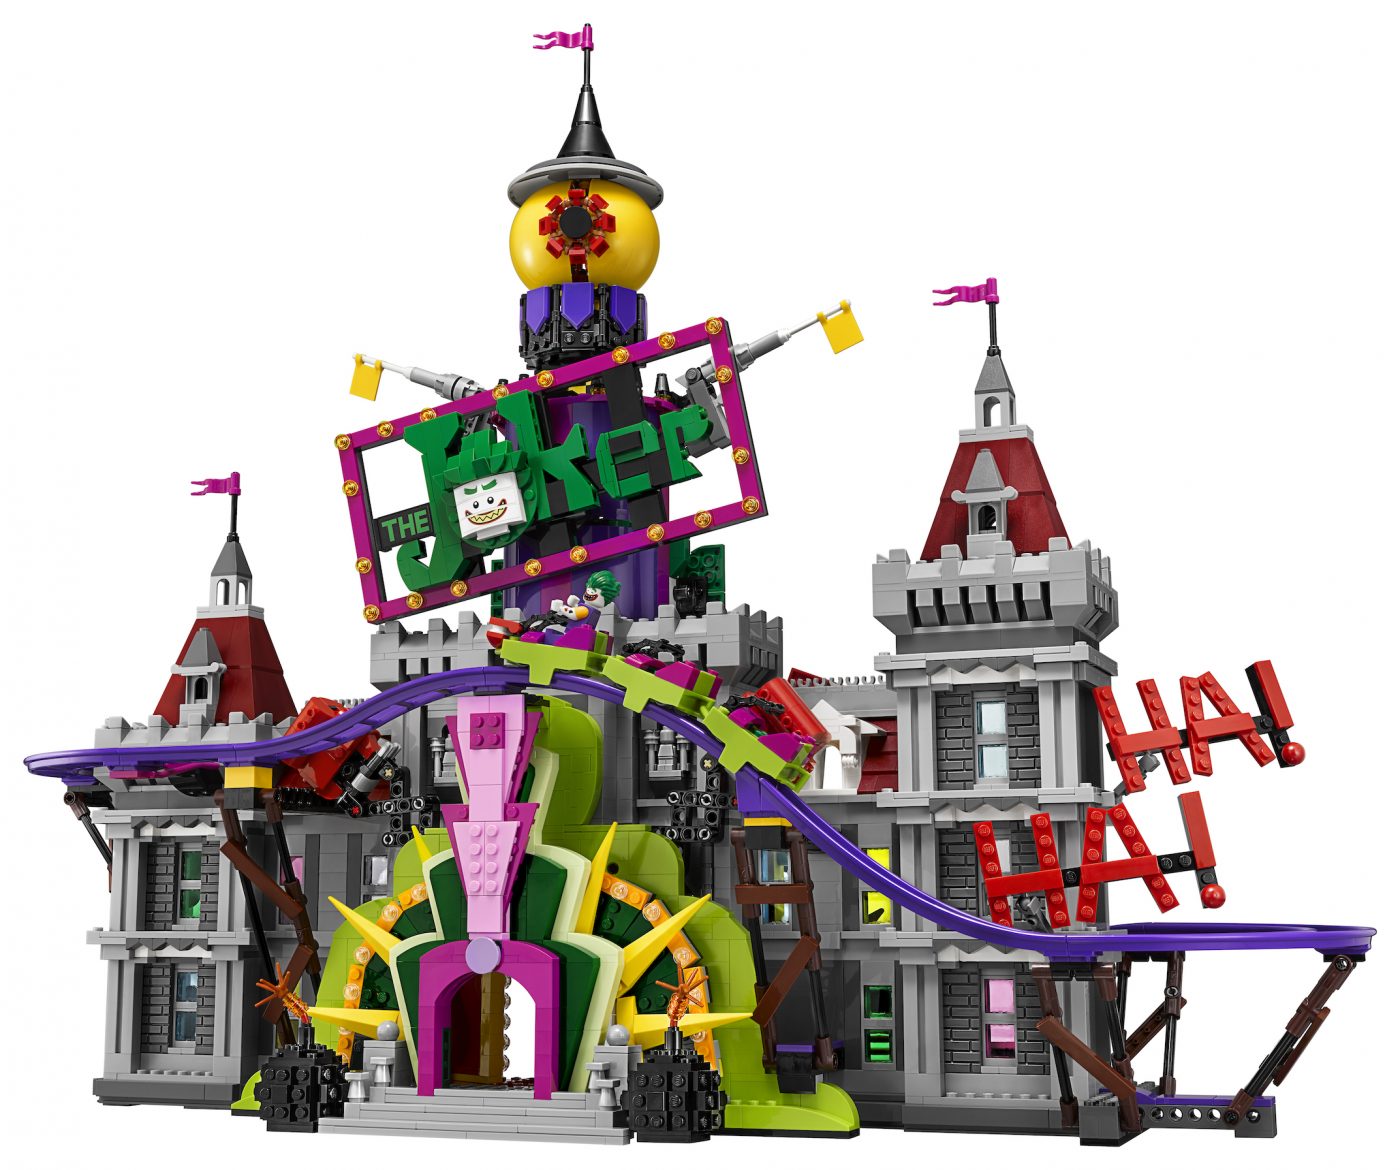 Lose your mind at The Joker Manor: New from LEGO